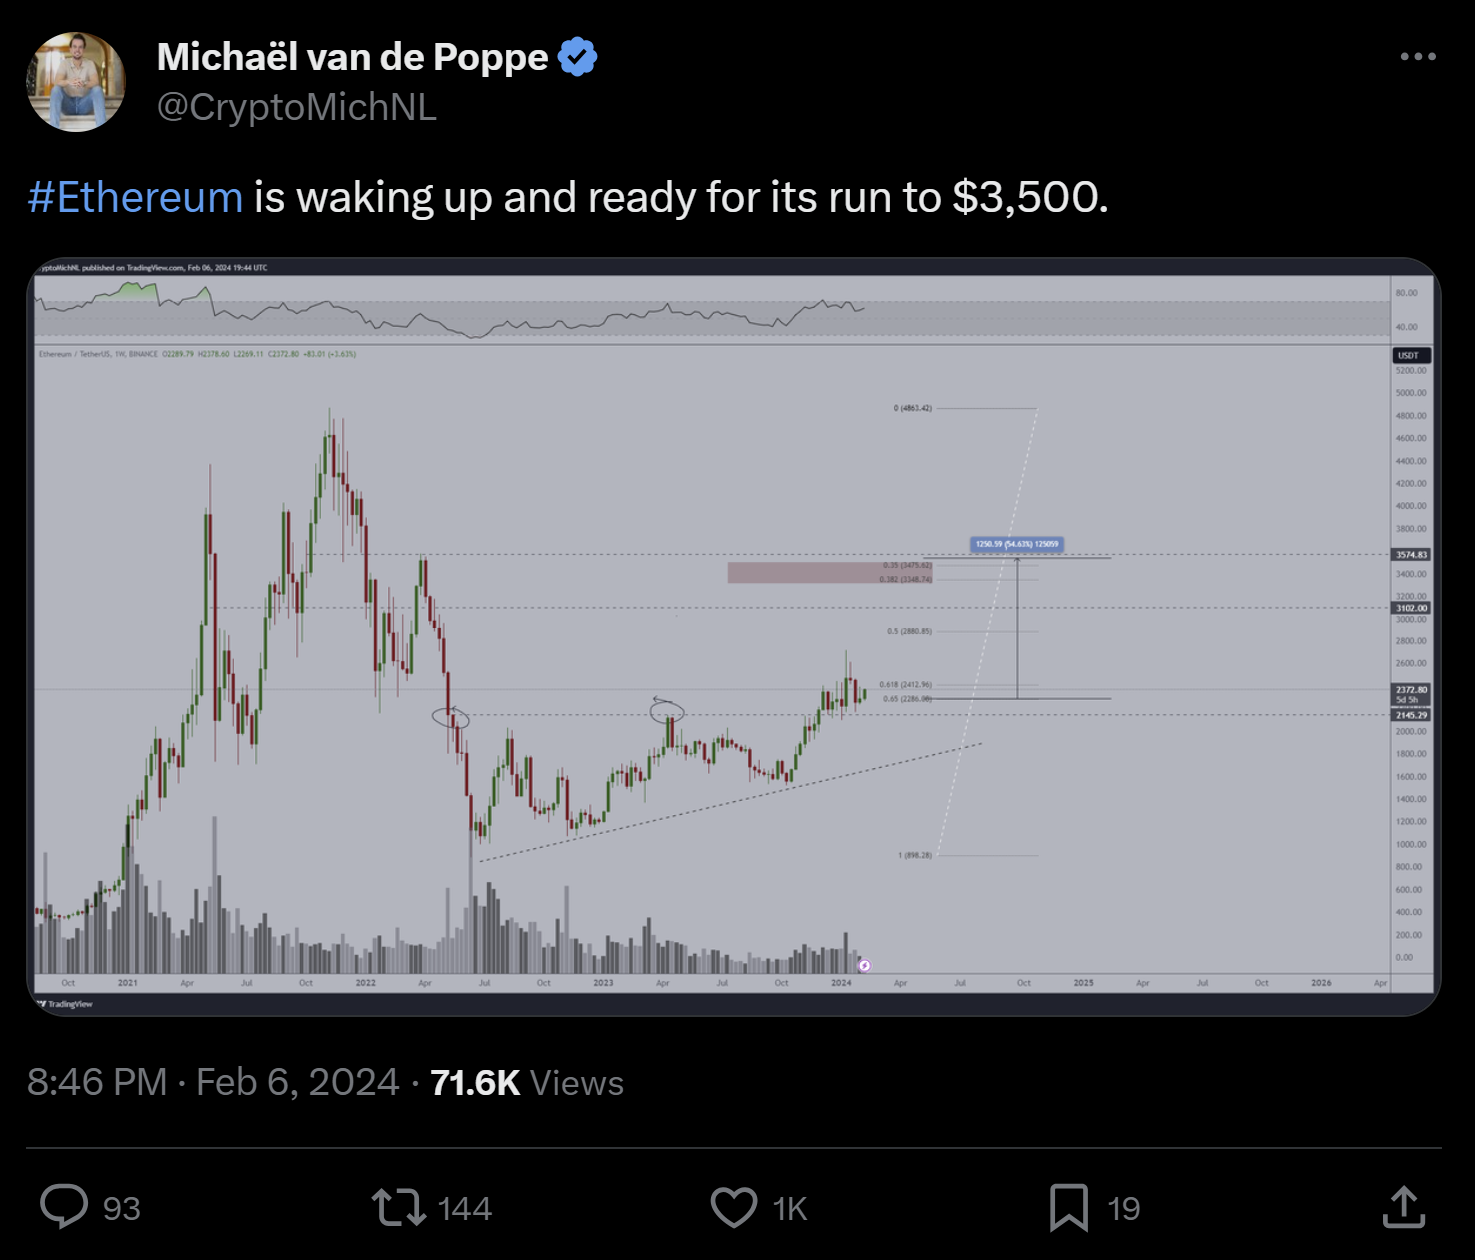 X Post by Michaël van de Poppe anticipating a run in ETH to $3,500